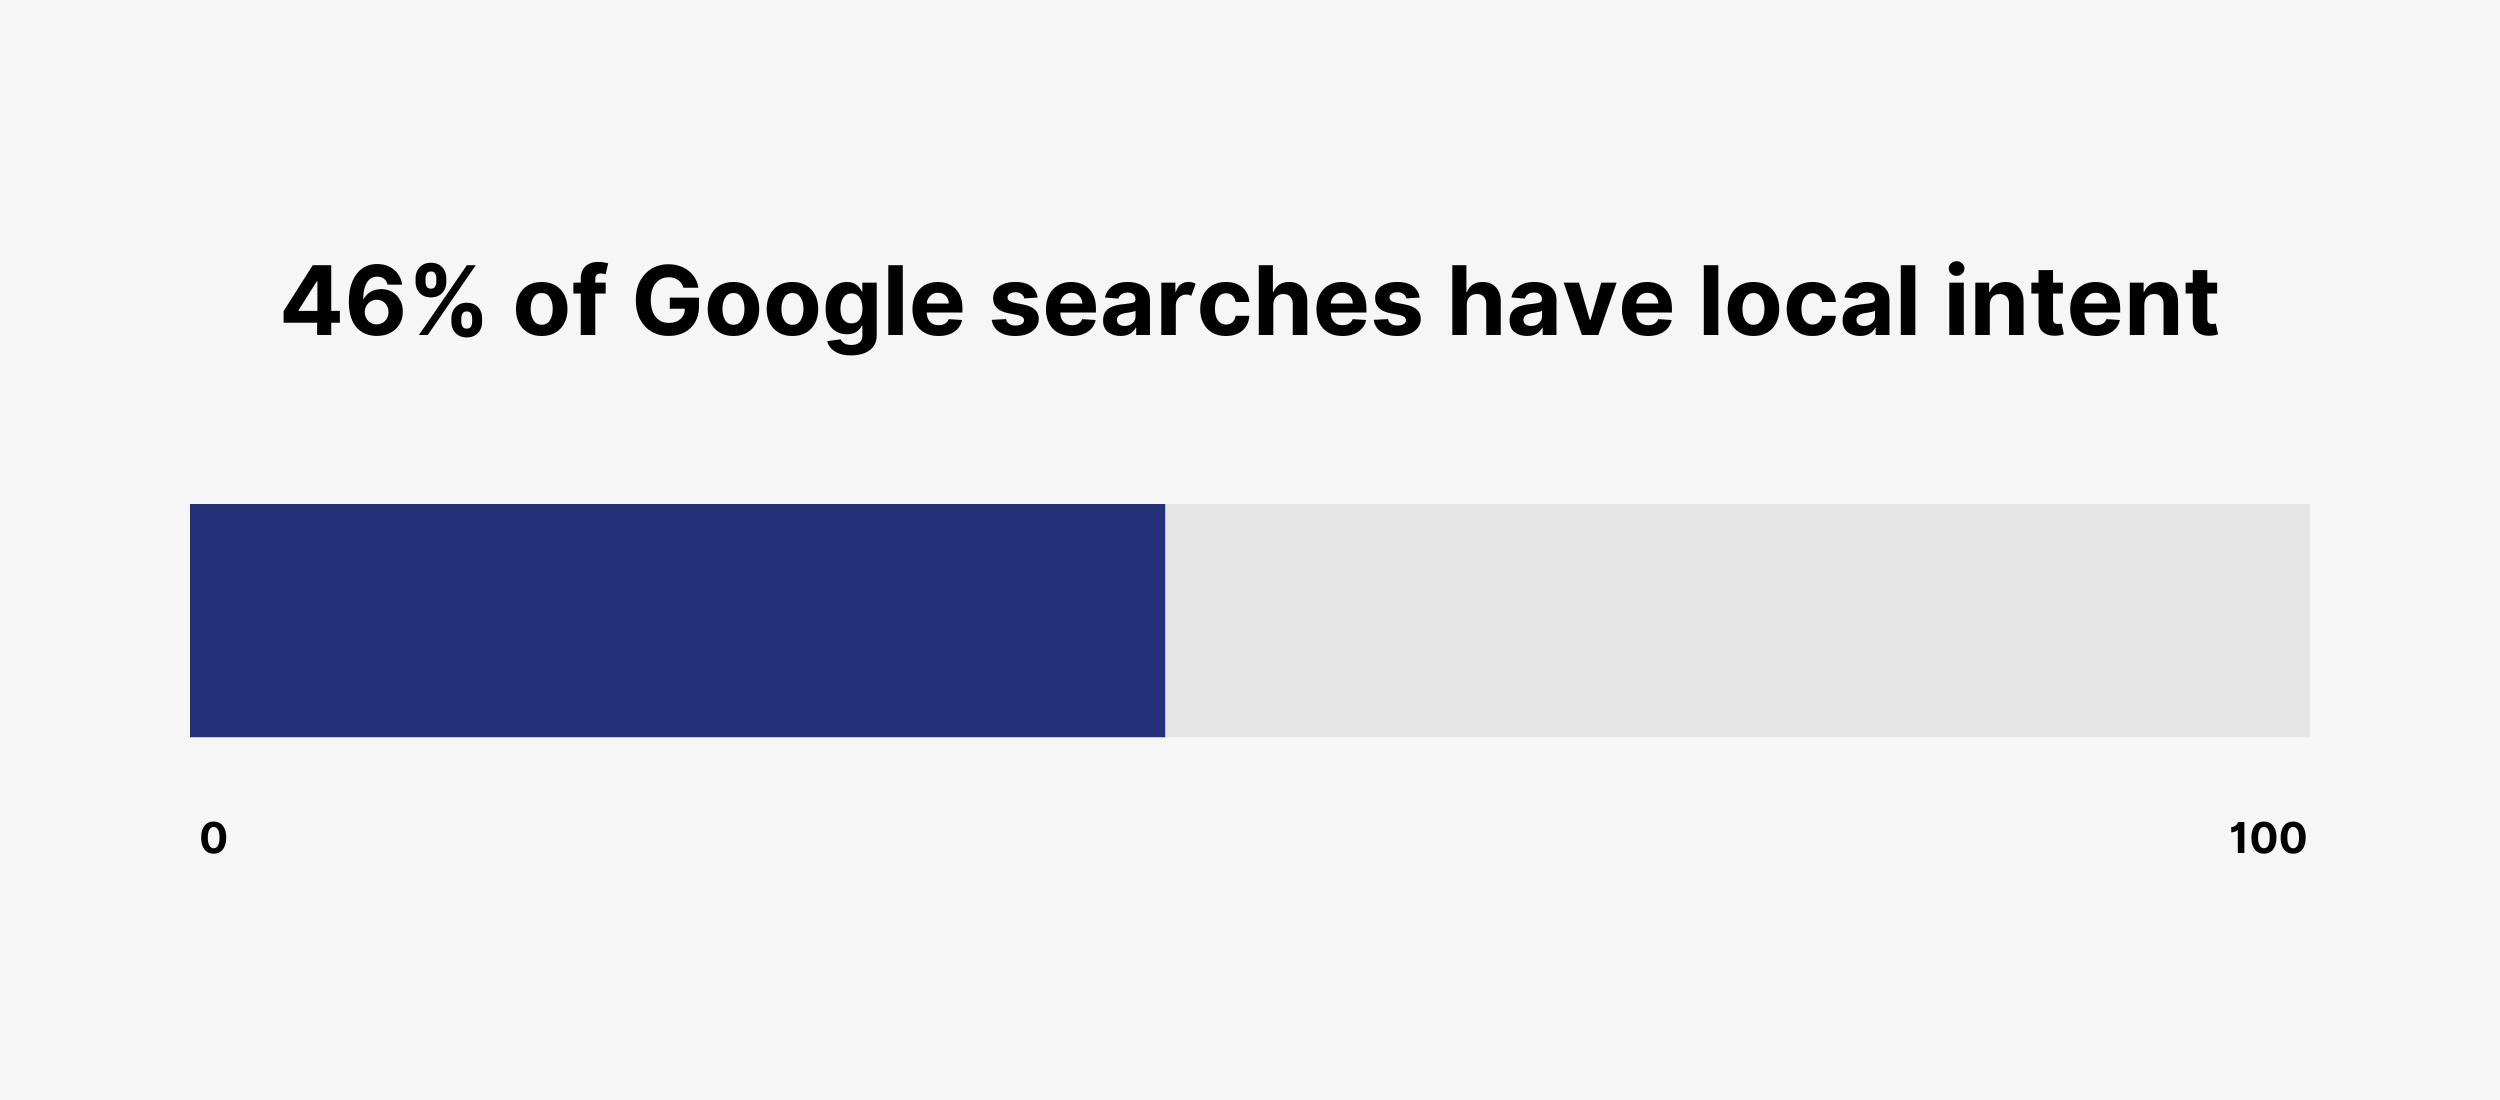 46% of Google searches have local intent